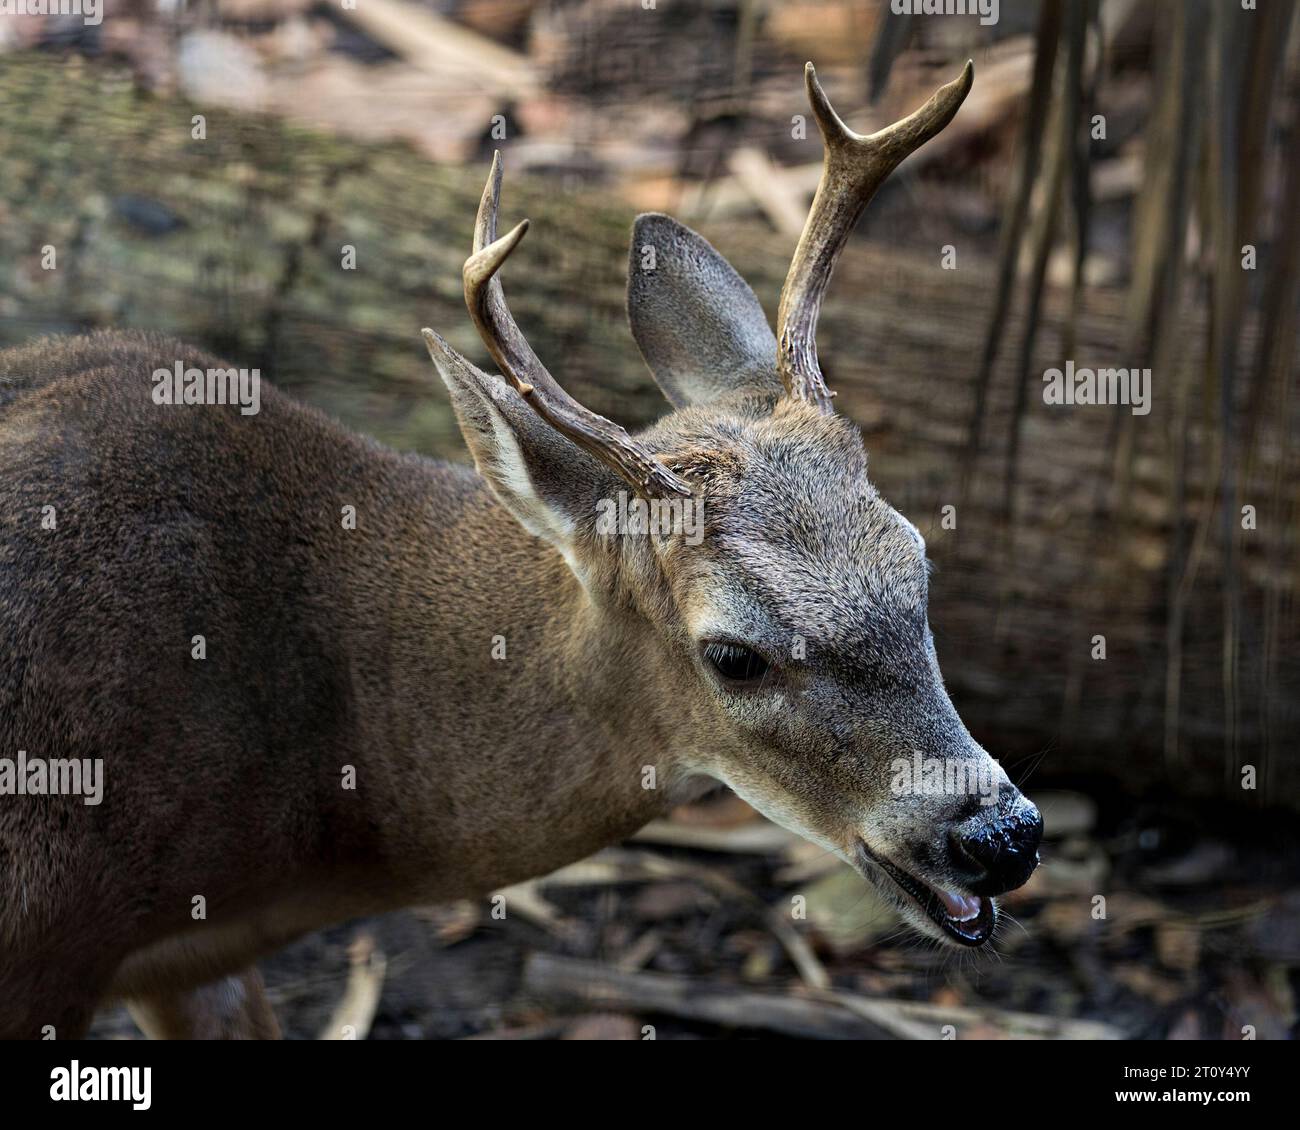 Deer Florida Key Deer male close-up head shot view displaying head, antlers, ears, eyes, nose, with a blur background in its environment and habitat. Stock Photo